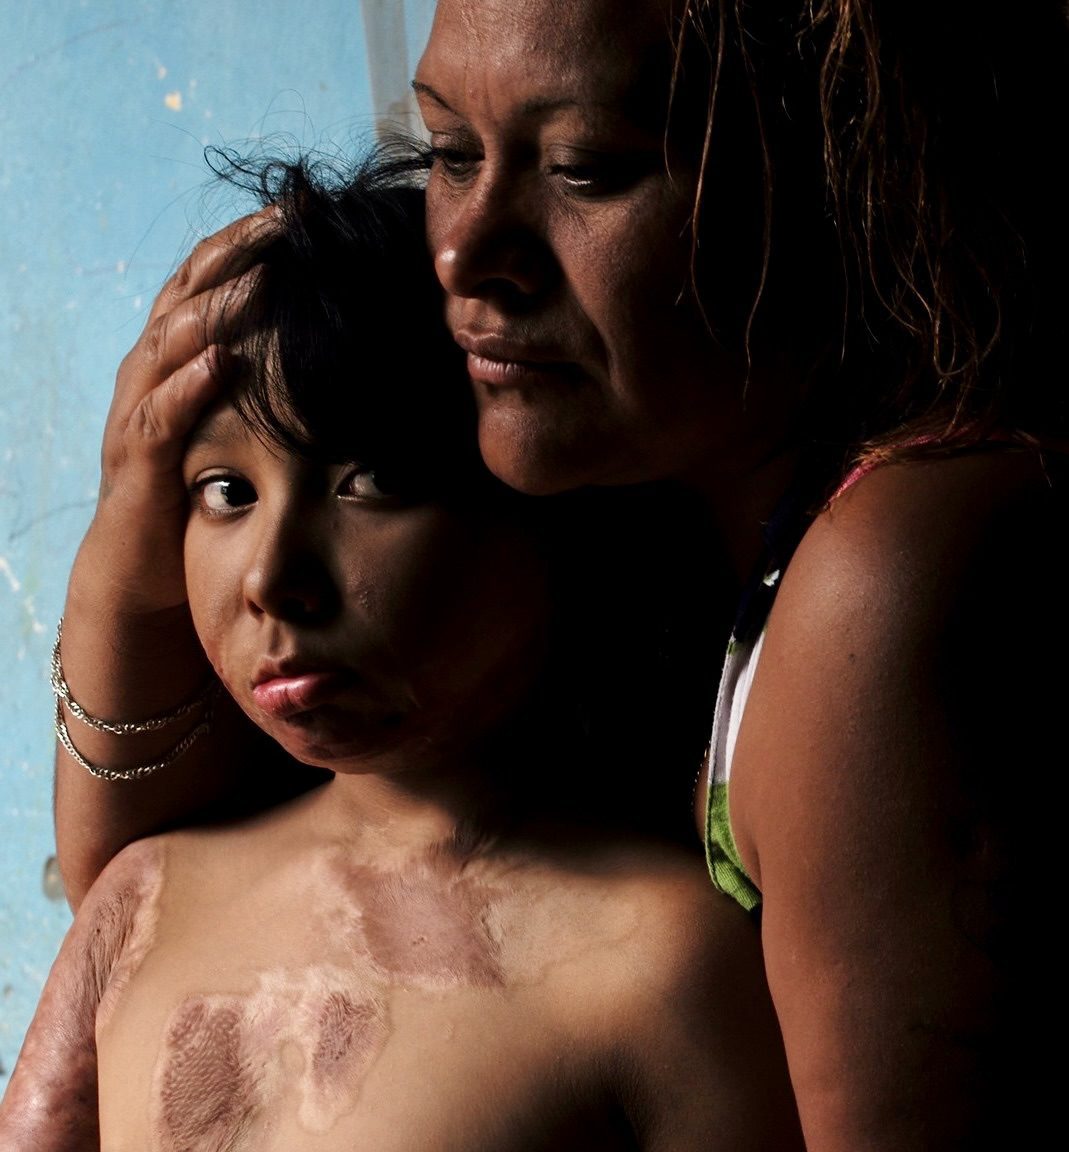 A mother hugs her child with visible burns on the chest and arms.